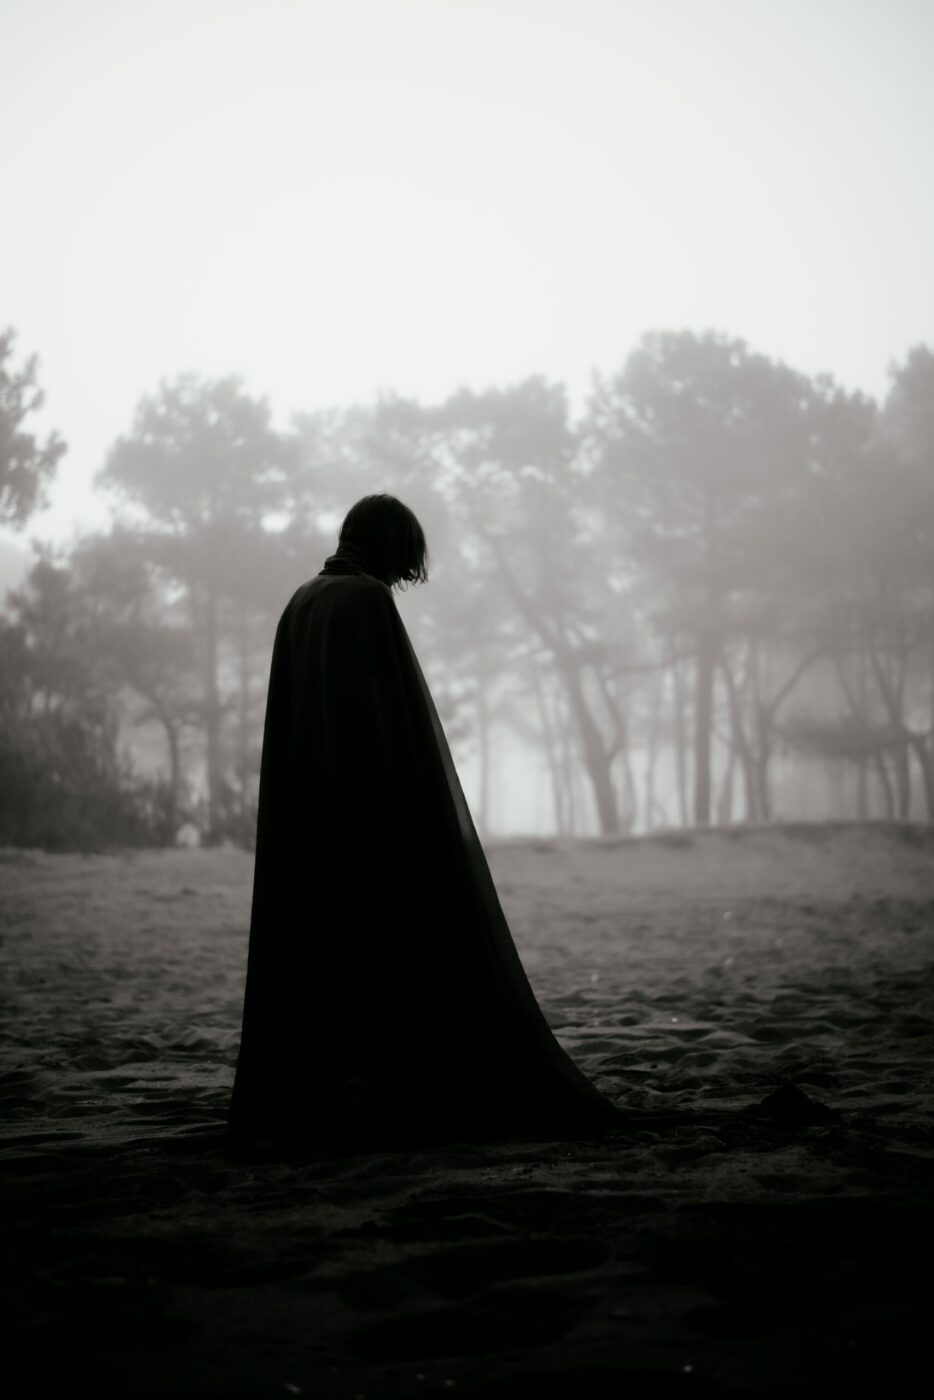 Dark silhouette of a woman in a dress in front of a foggy background of a forest.  